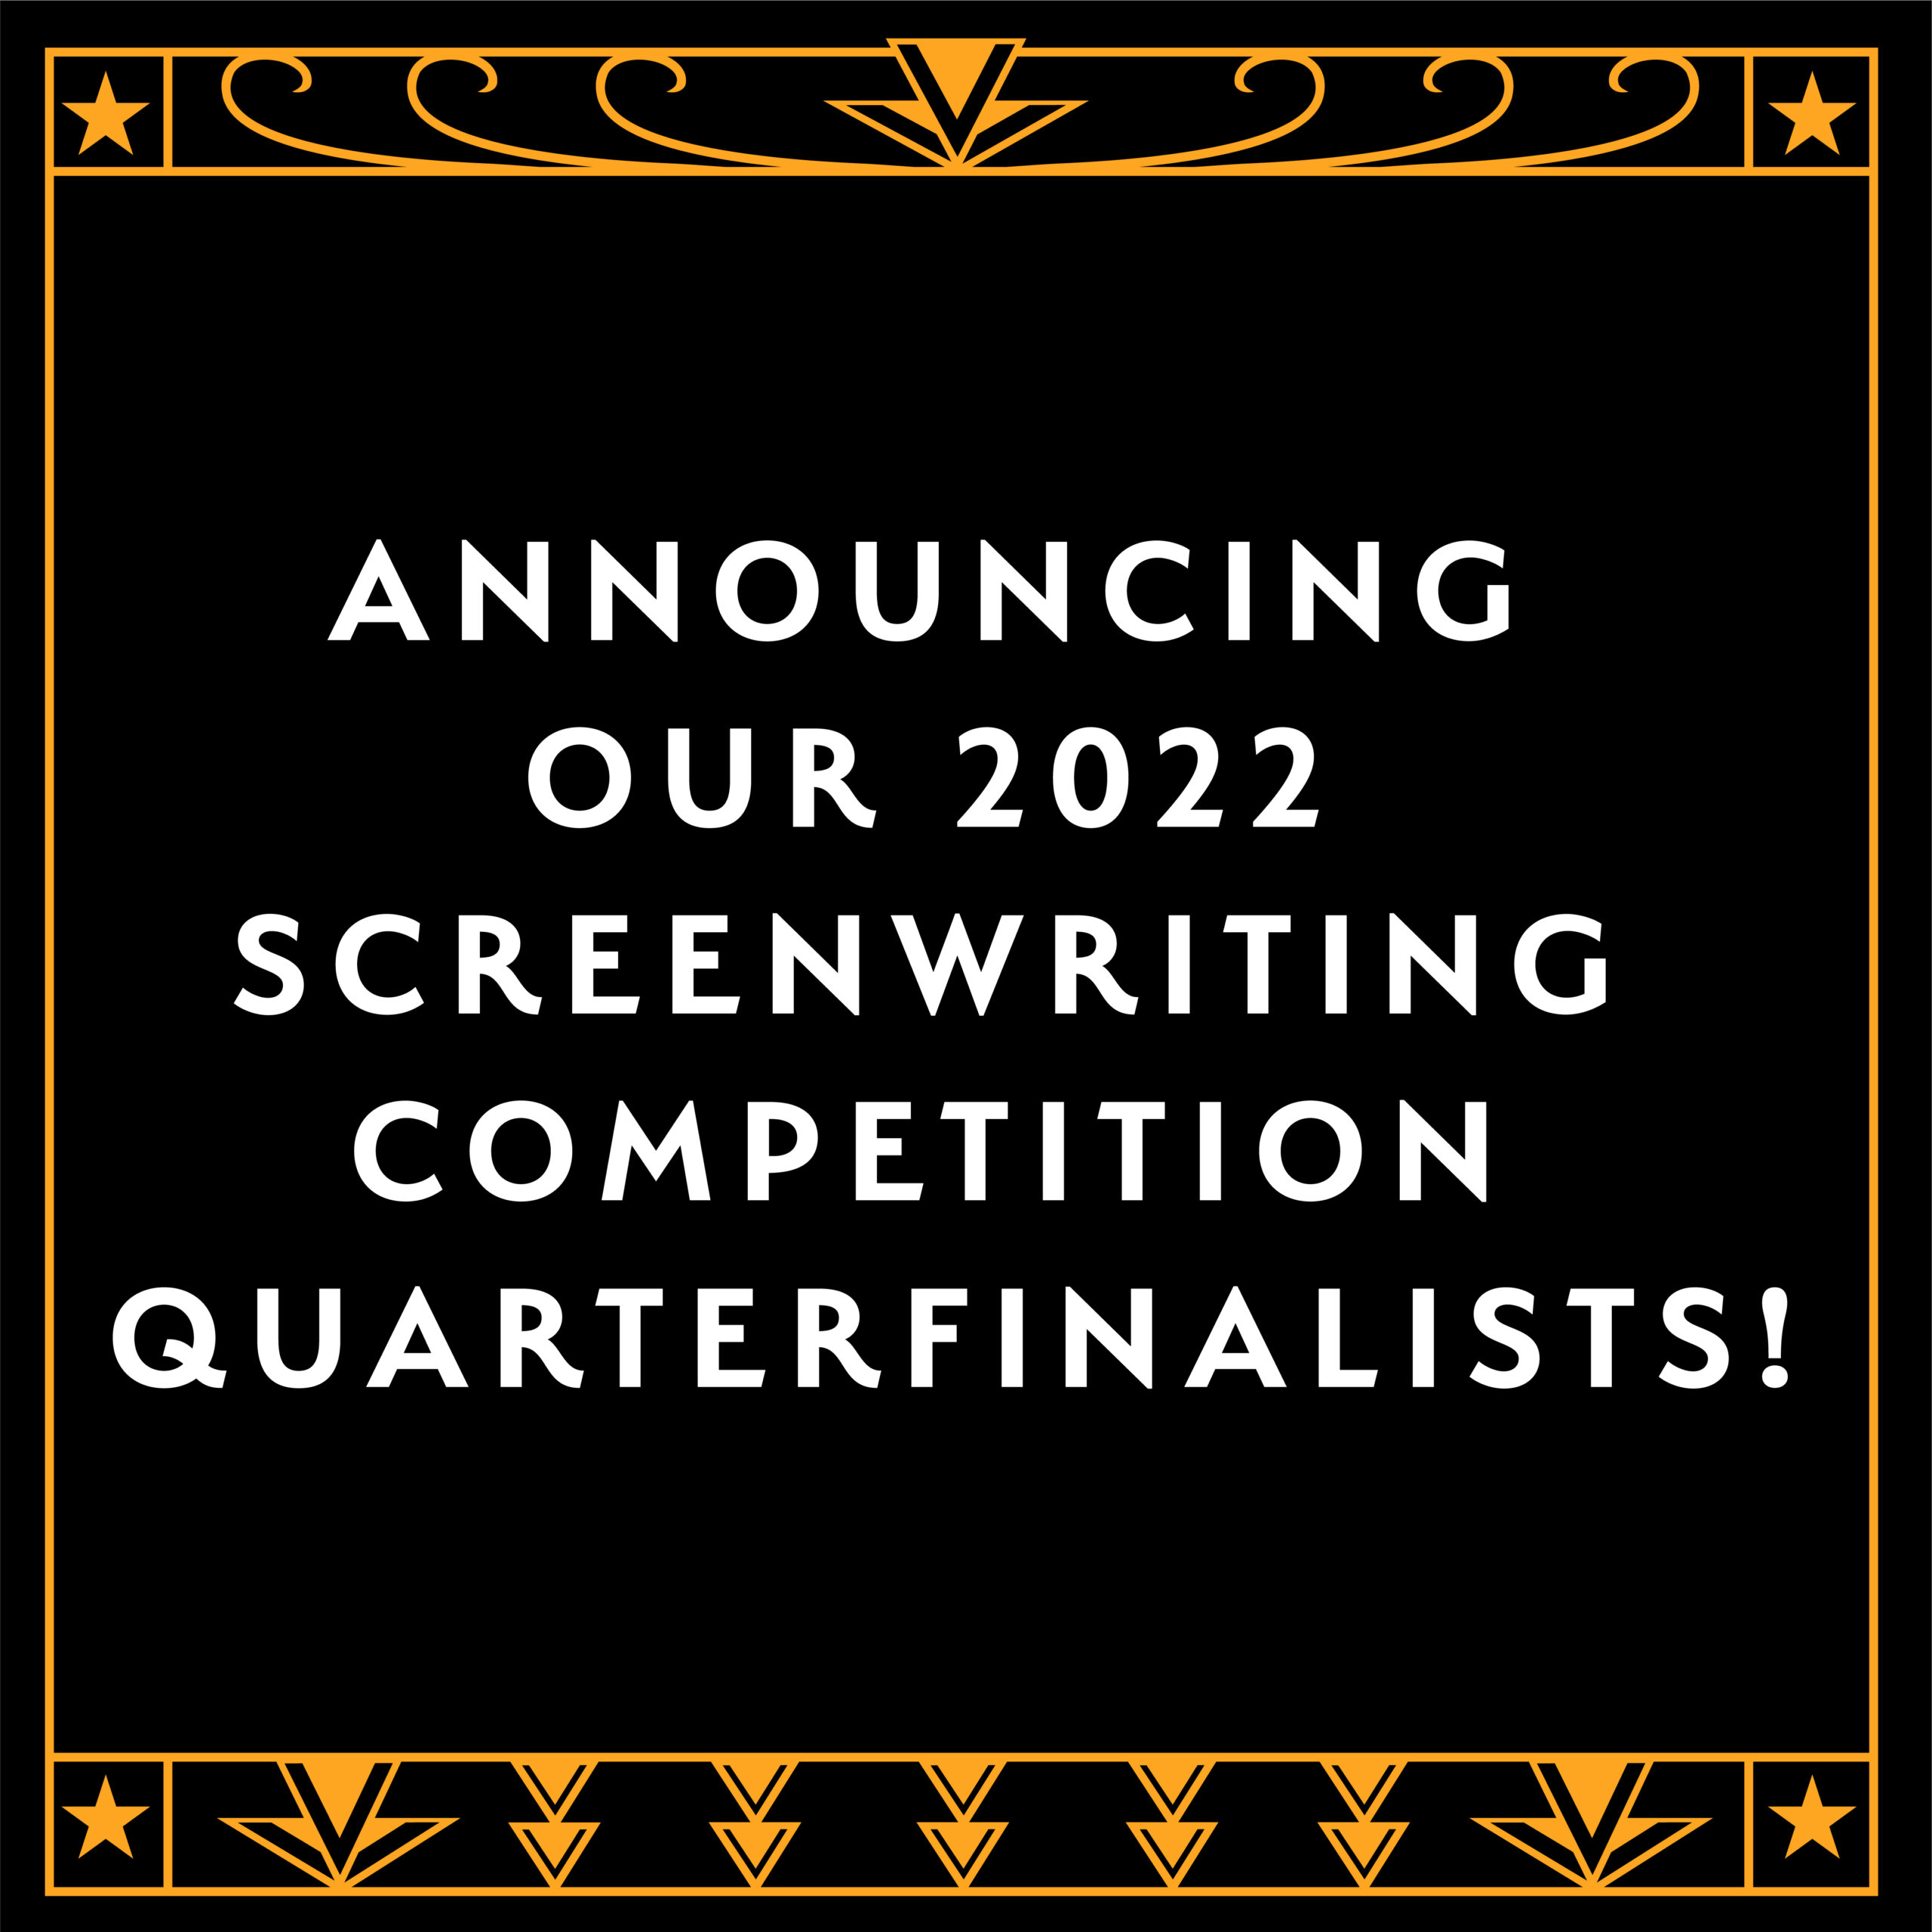 The Wiki Screenplay Contest Results: Finalists and Winners